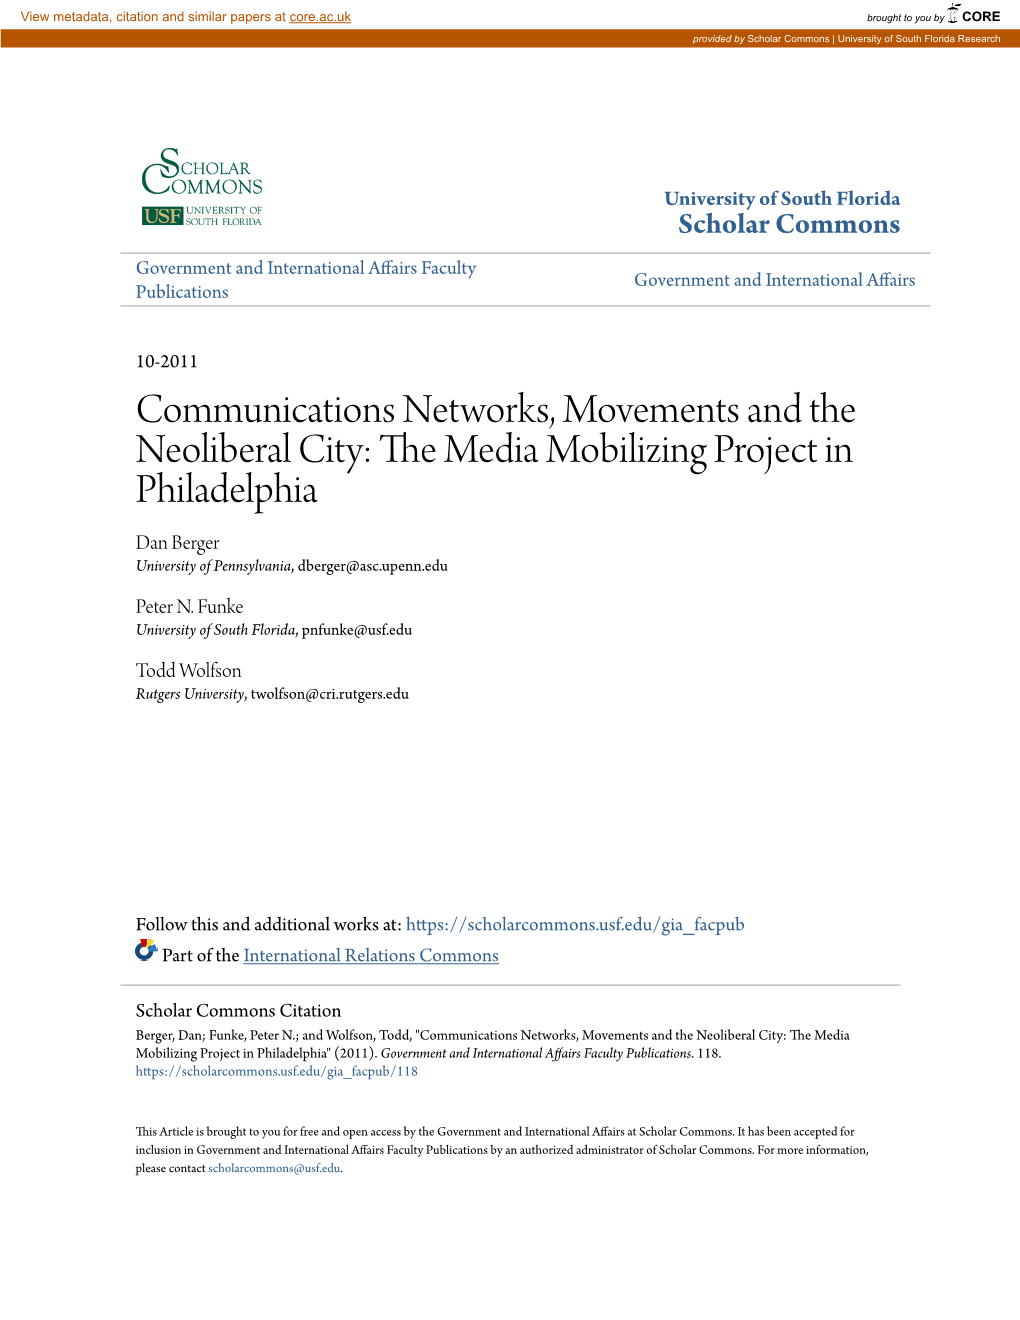 Communications Networks, Movements and the Neoliberal City: the Edim a Mobilizing Project in Philadelphia Dan Berger University of Pennsylvania, Dberger@Asc.Upenn.Edu